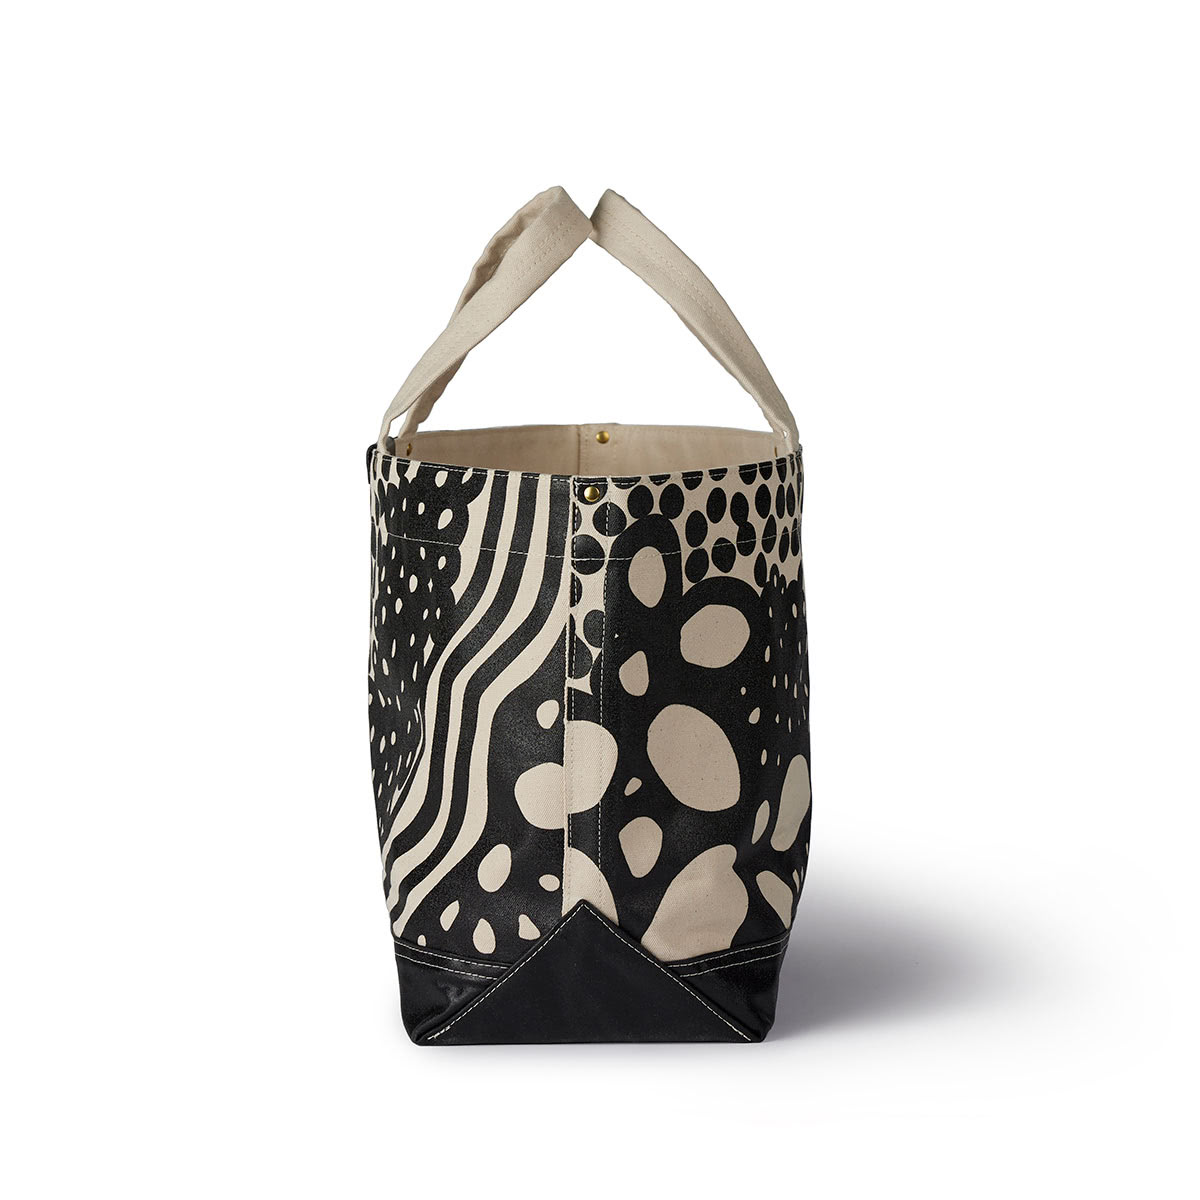 Side profile of Black and tan colored tote by Angela Adams